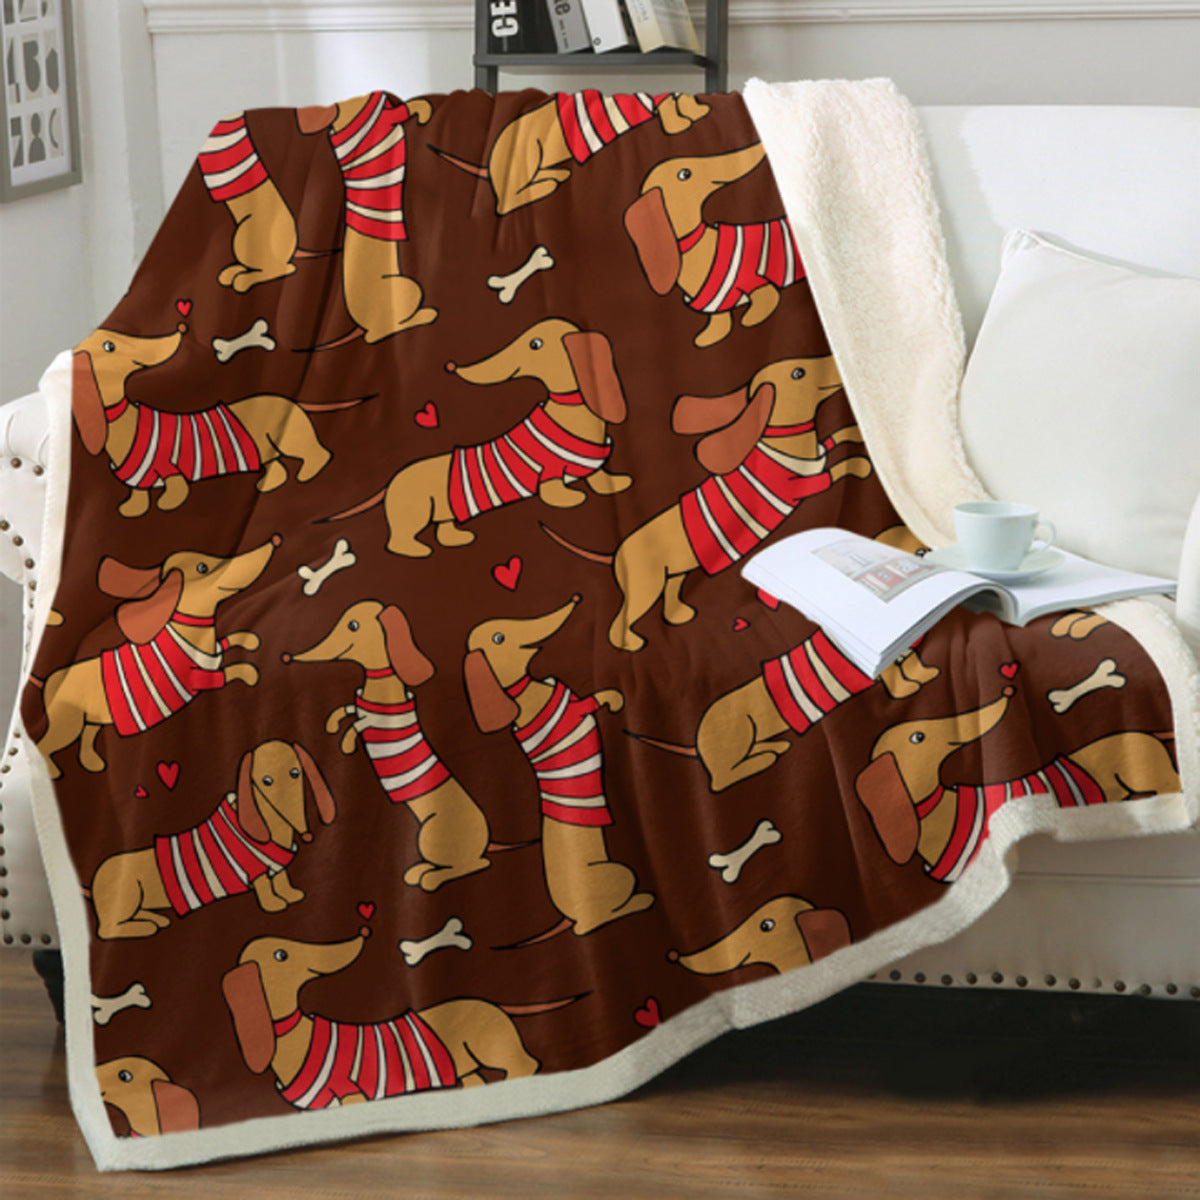 Cute Dog Print Fleece Blankets for Christmas-Blankets-1-6-40*60 inches-Free Shipping at meselling99